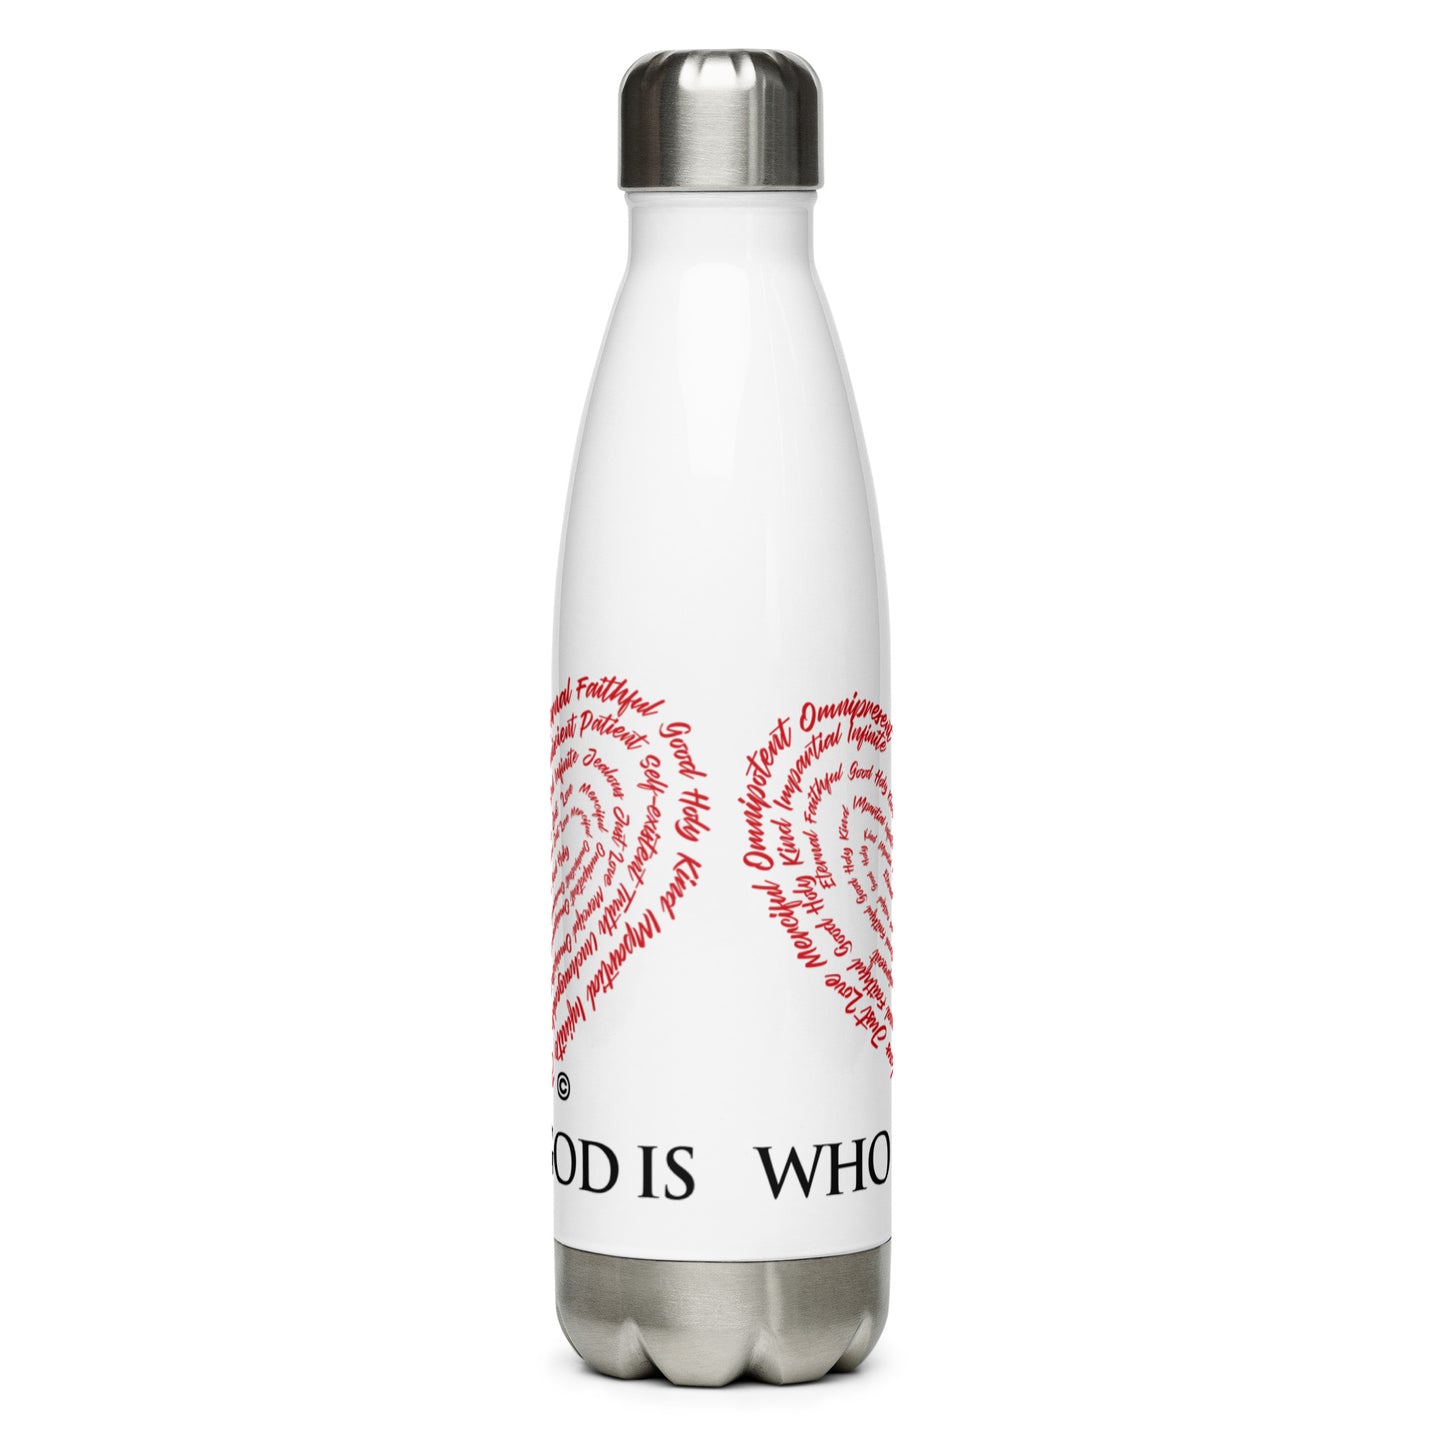 Who God Is Stainless Steel Water Bottle